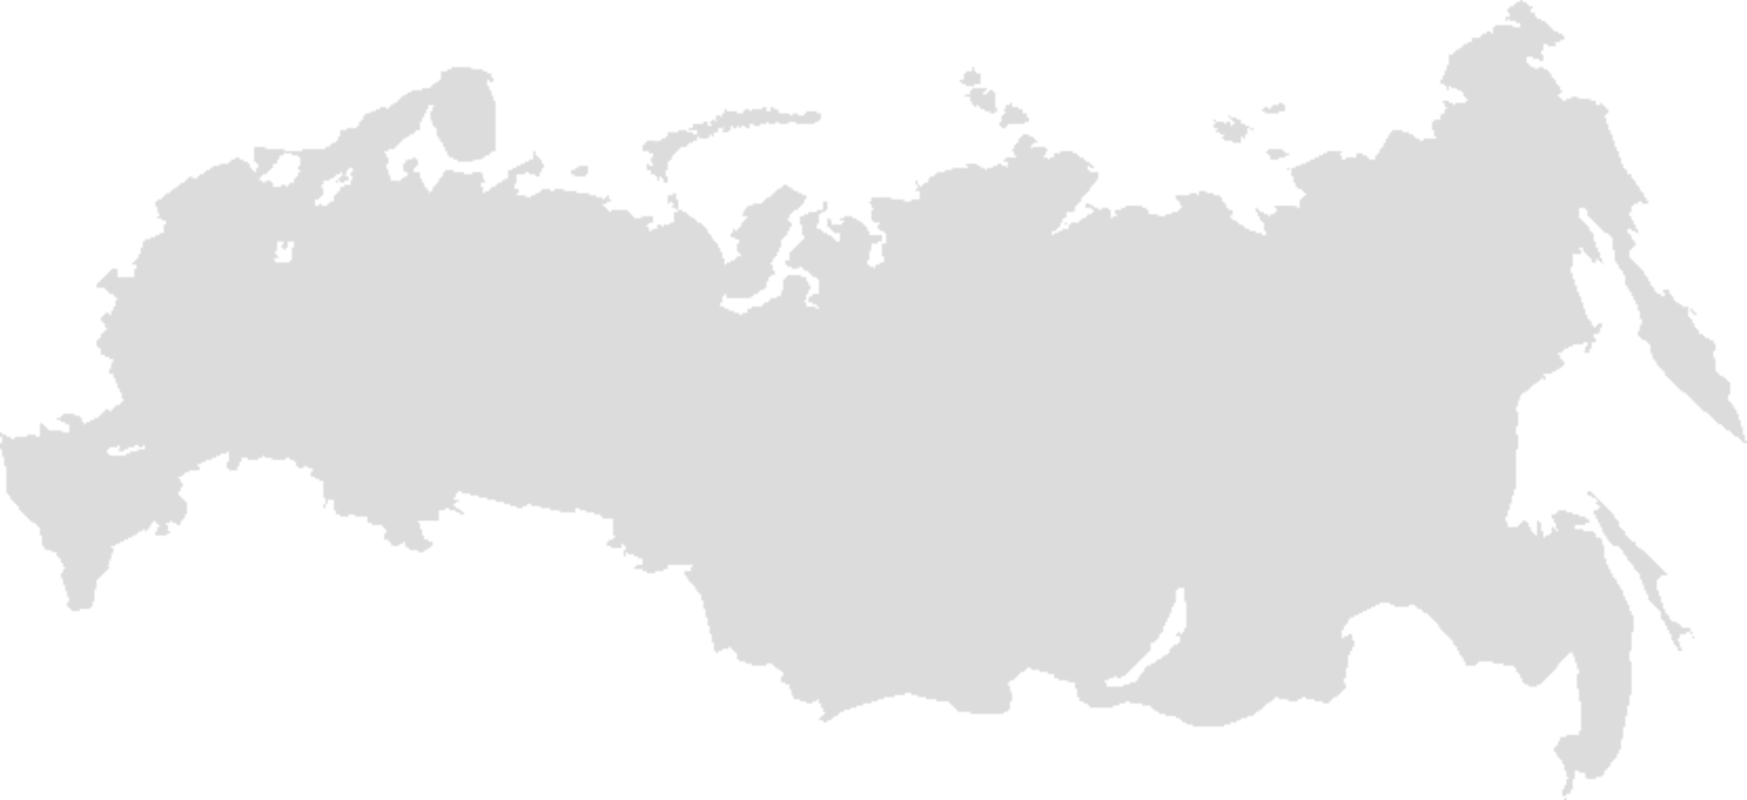 Database of companies registered in Russian Federation